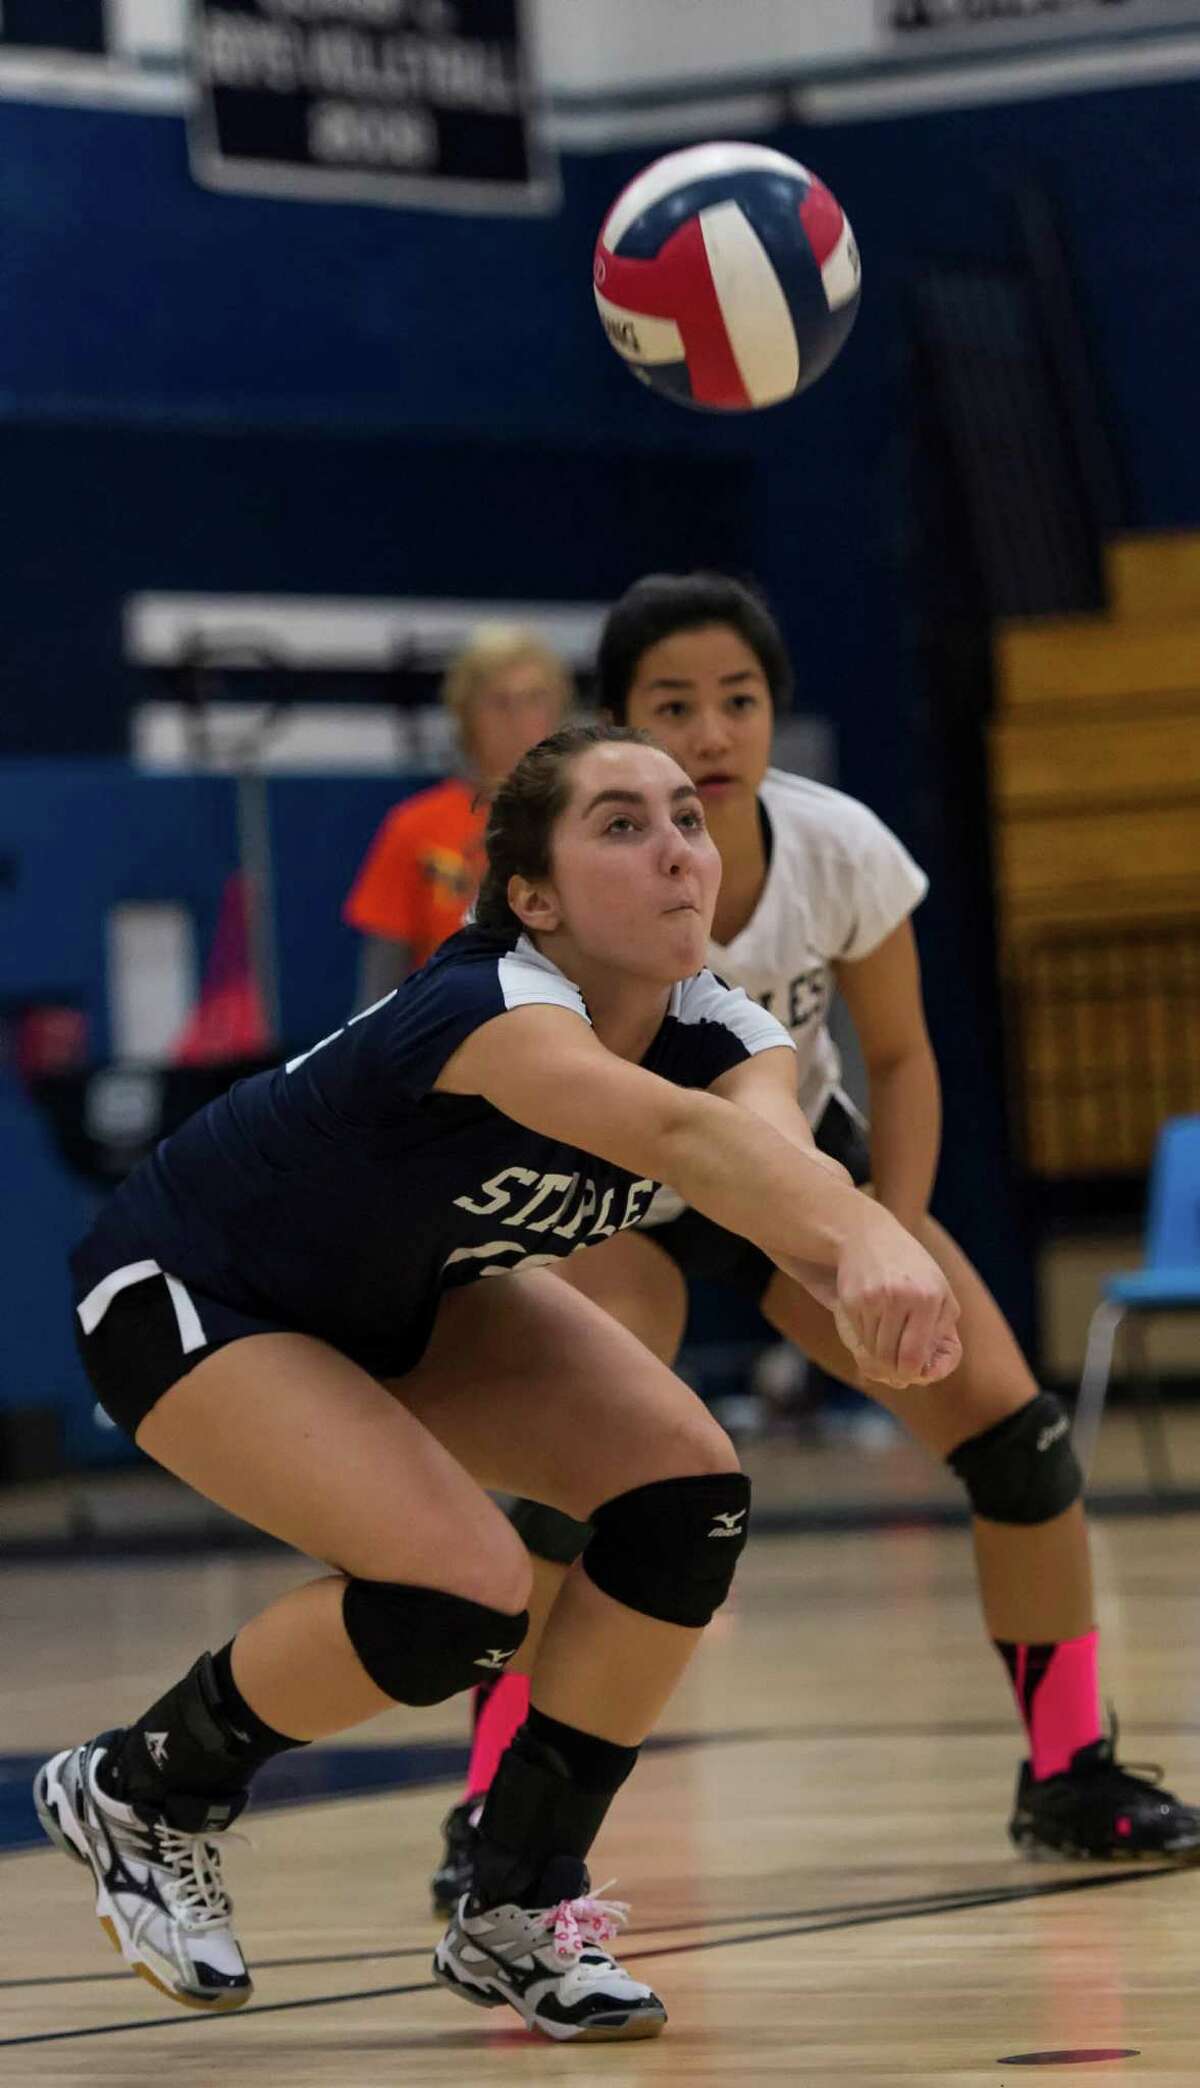 Trinity Catholic High School against Staples High School during a girls volleyball game played at Staples High School, Westport, CT on Wednesday, October 28, 2015.